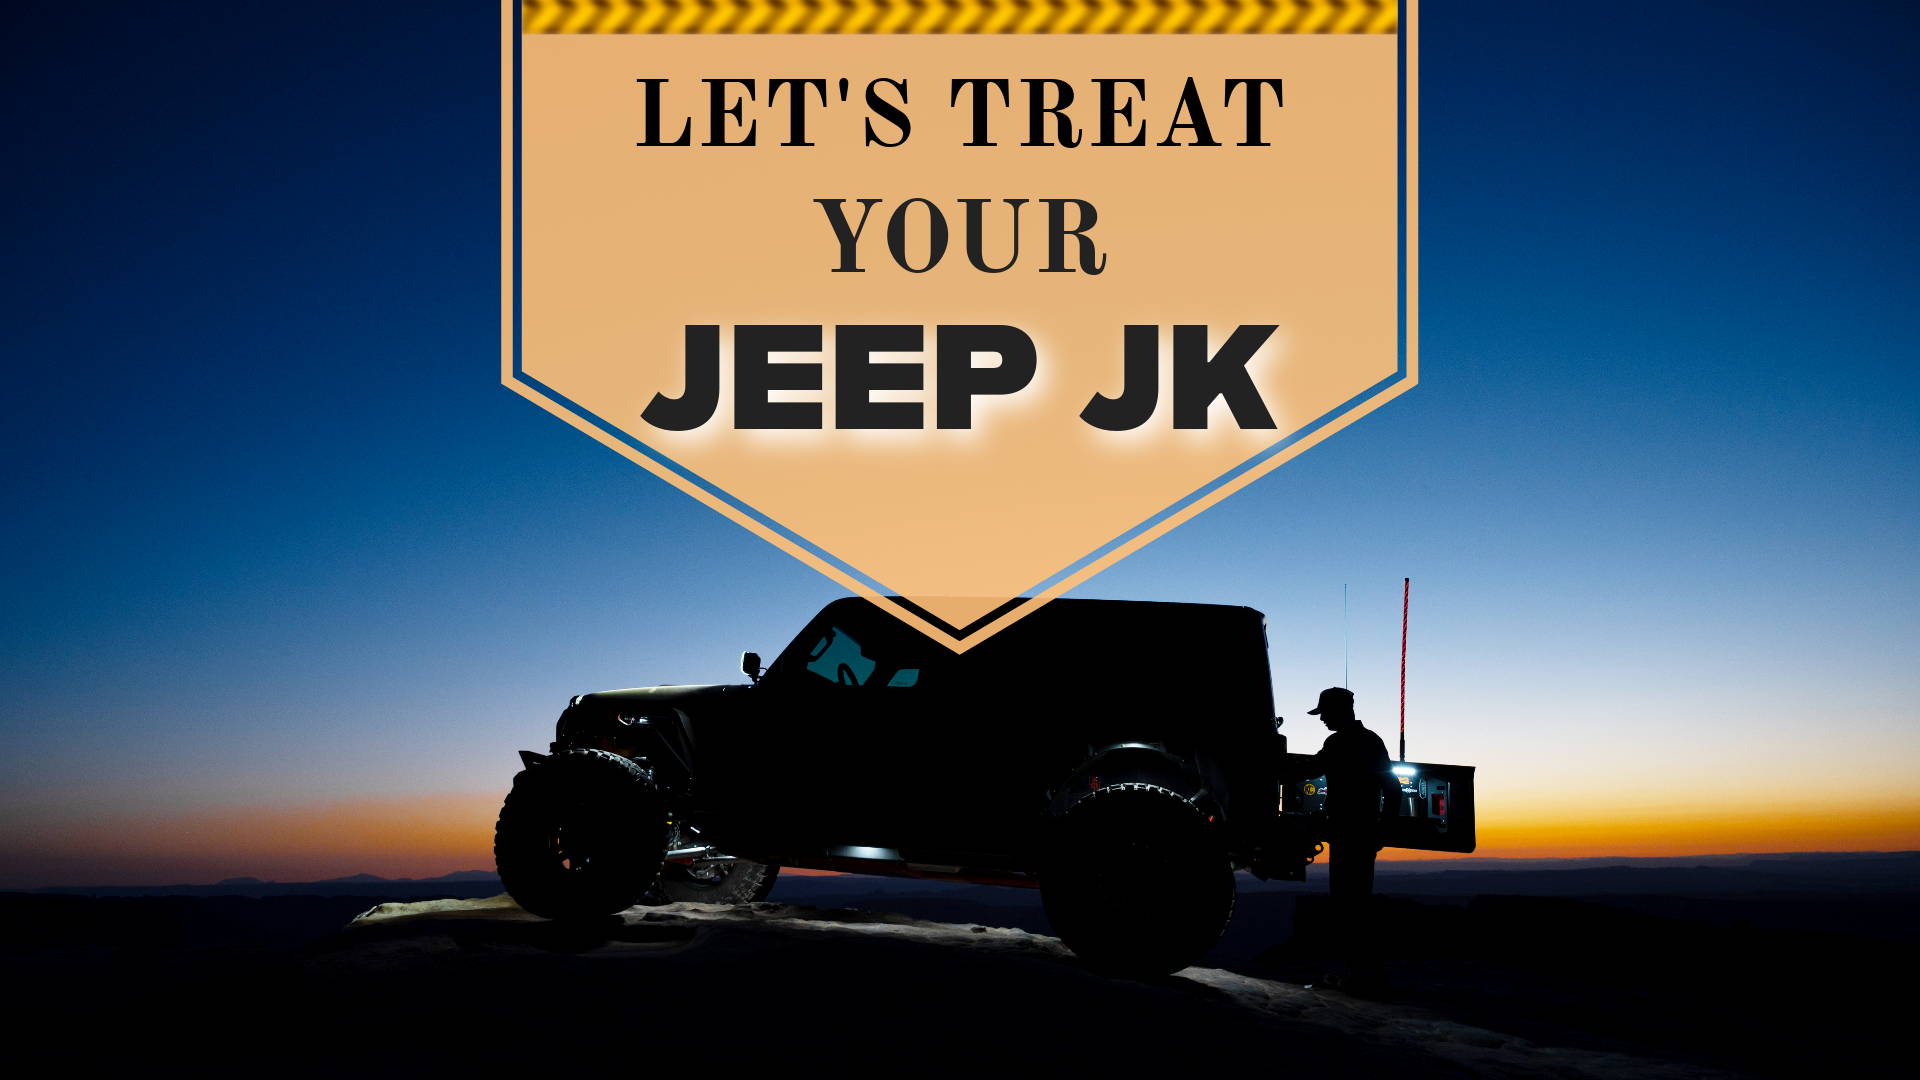 Top Products to Upgrade Your Jeep JK